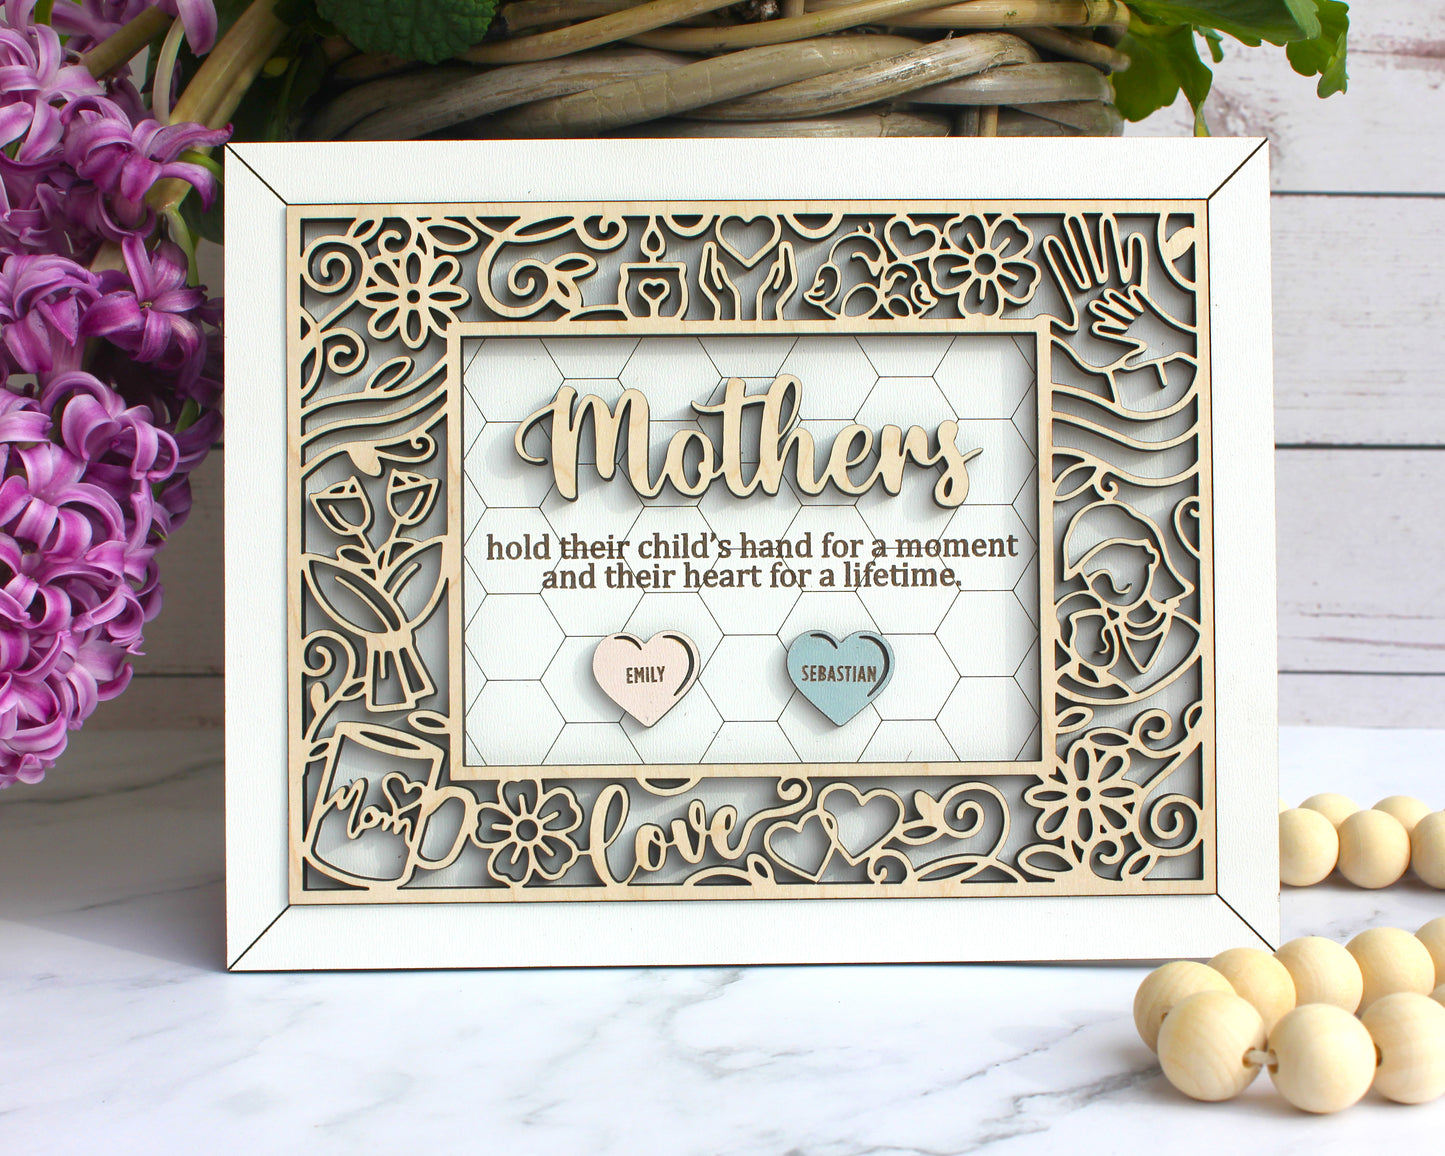 Personalized Mother's day sign